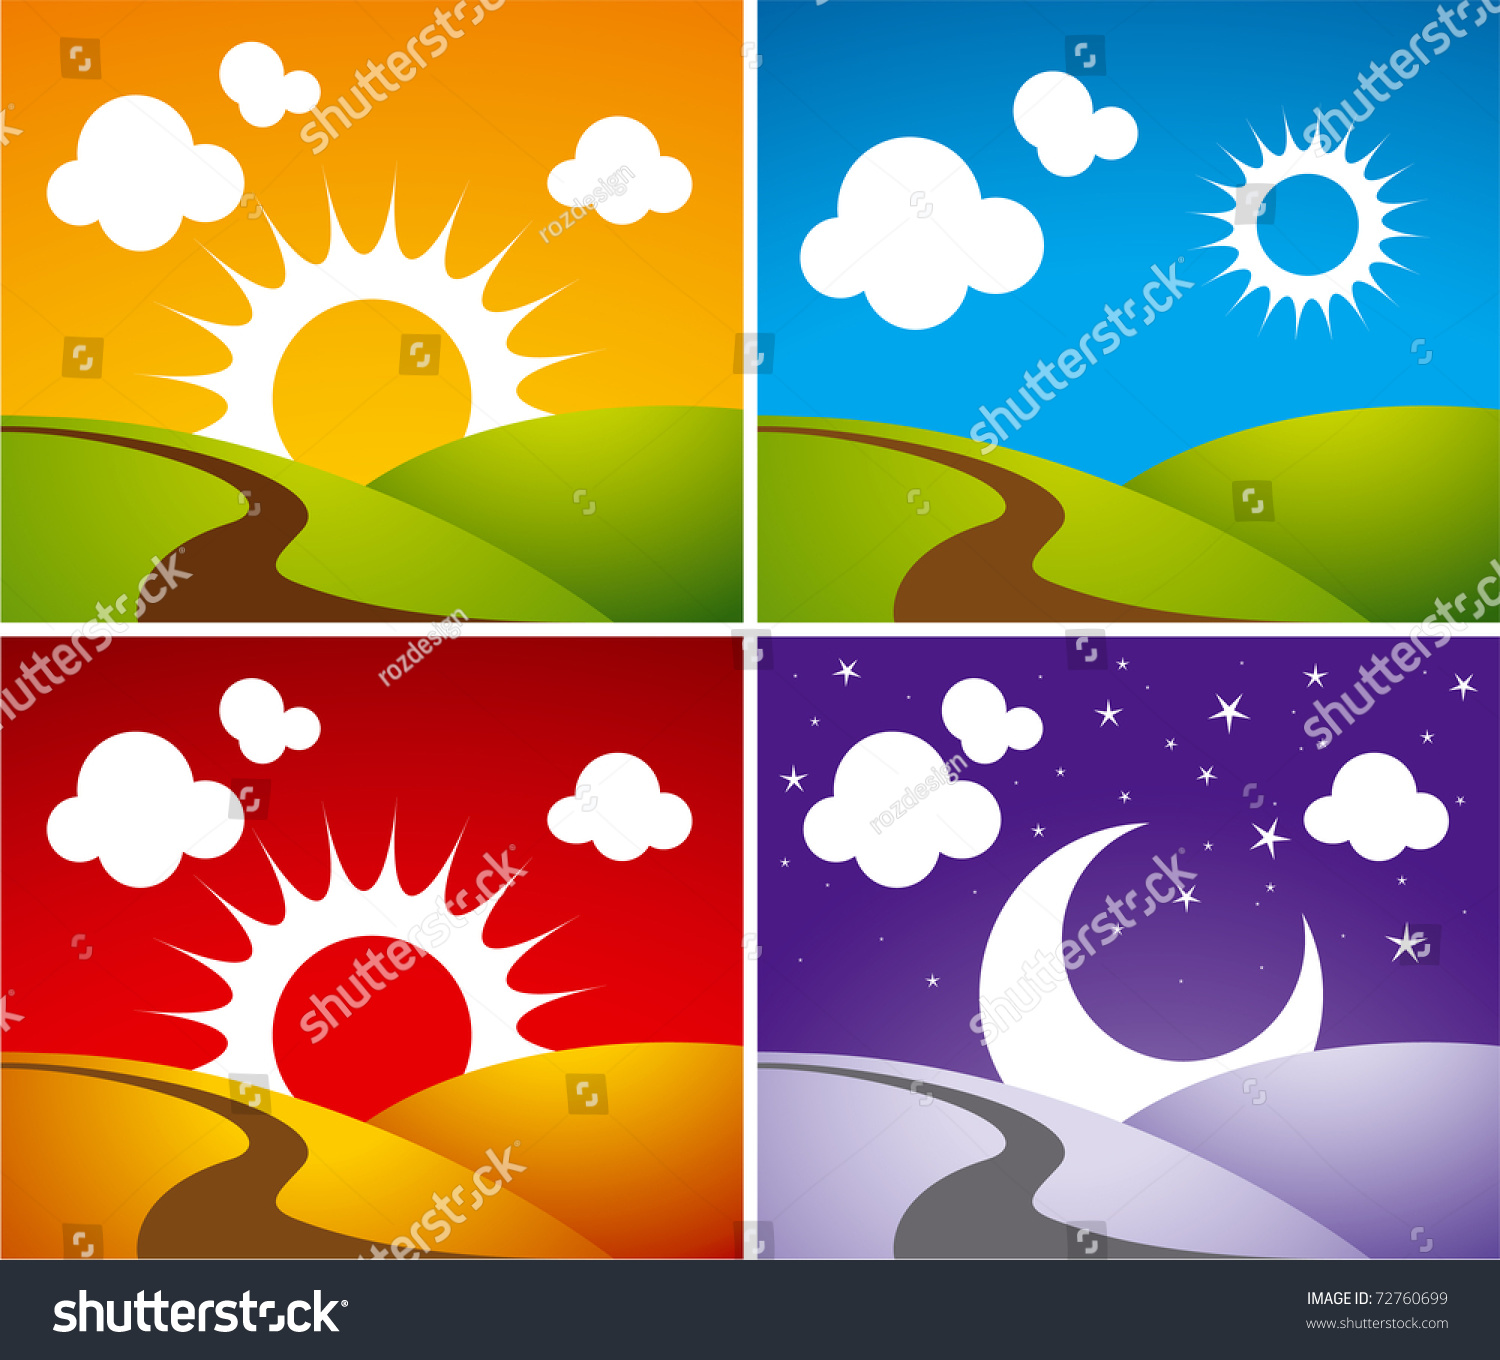 day and night clipart free - photo #42